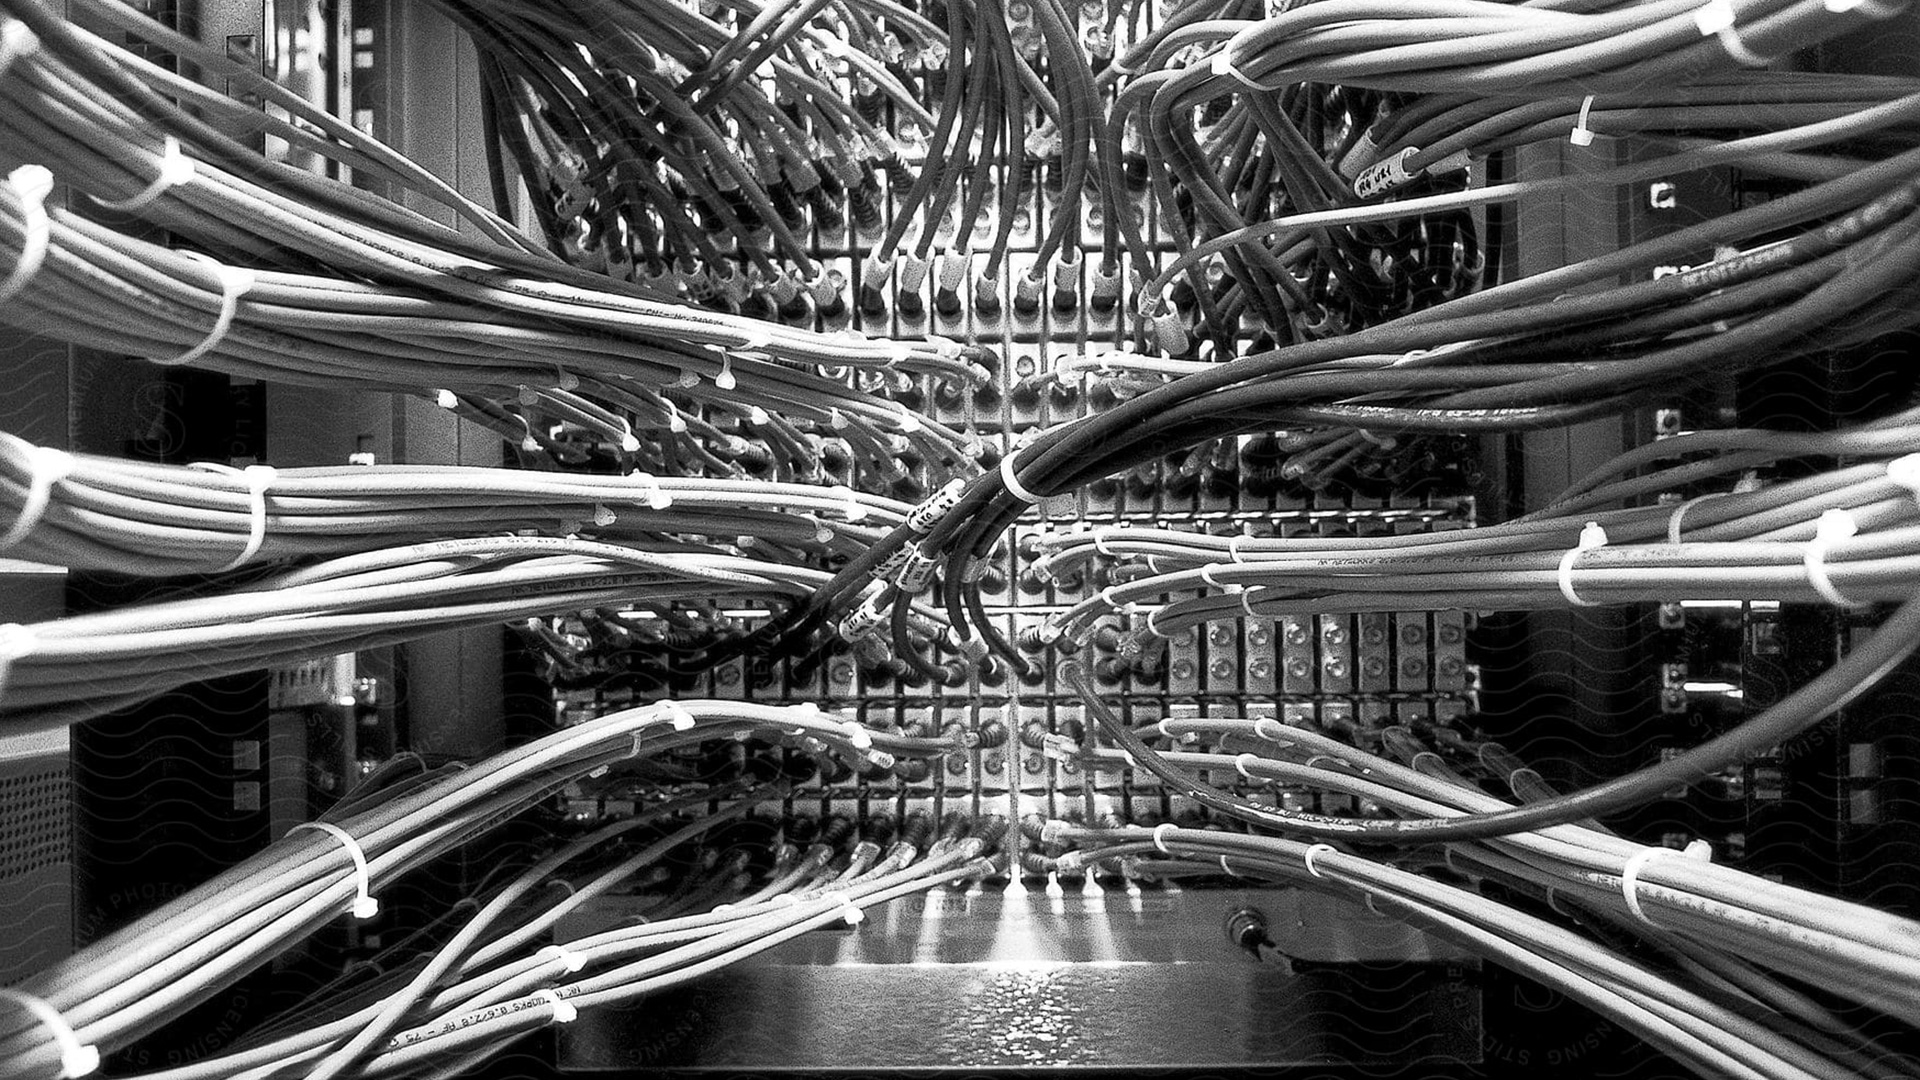 A close-up view of numerous network cables connected to a server rack in a data center, showing a tangle of wires and connectors. The image is in black and white, emphasizing the complexity and density of the cabling setup. - CSA Catapult